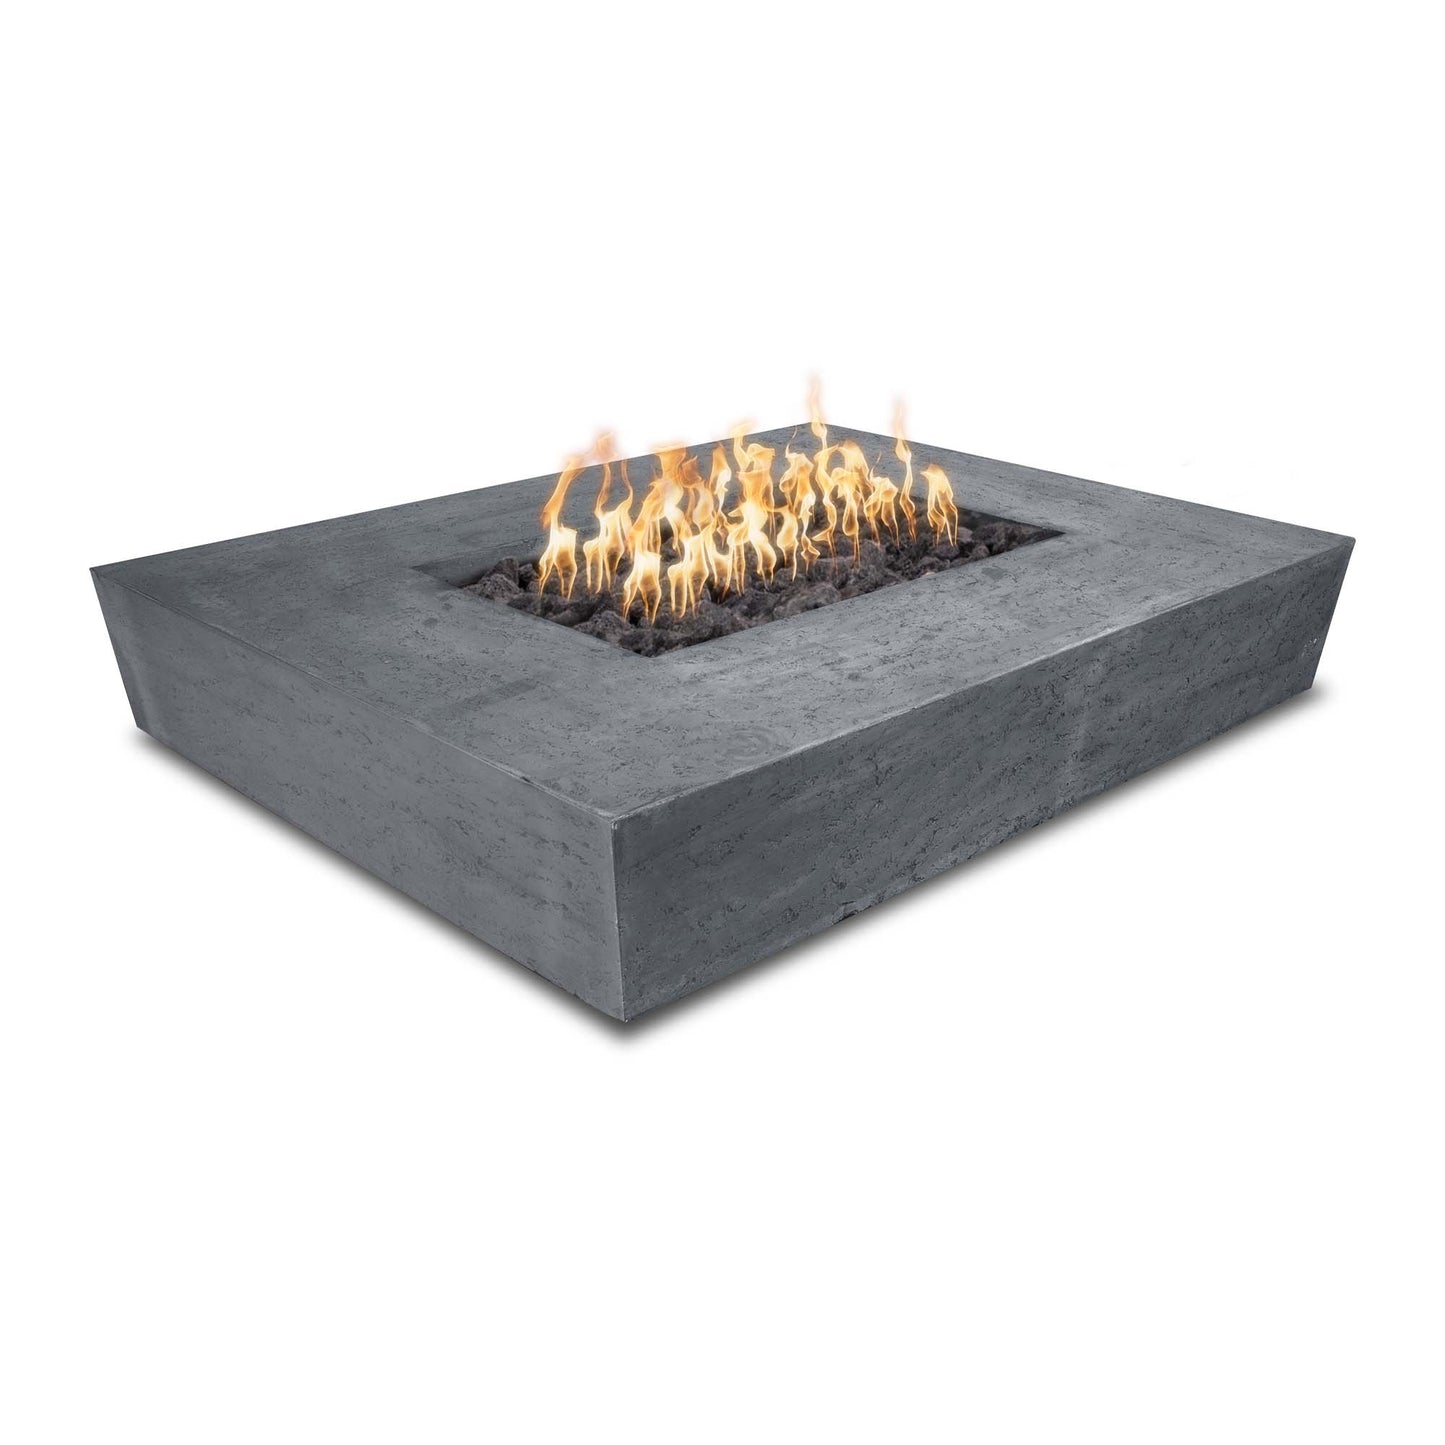 The Outdoor Plus Rectangular Heiko 58" Rustic Coffee GFRC Concrete Liquid Propane Fire Pit with 12V Electronic Ignition